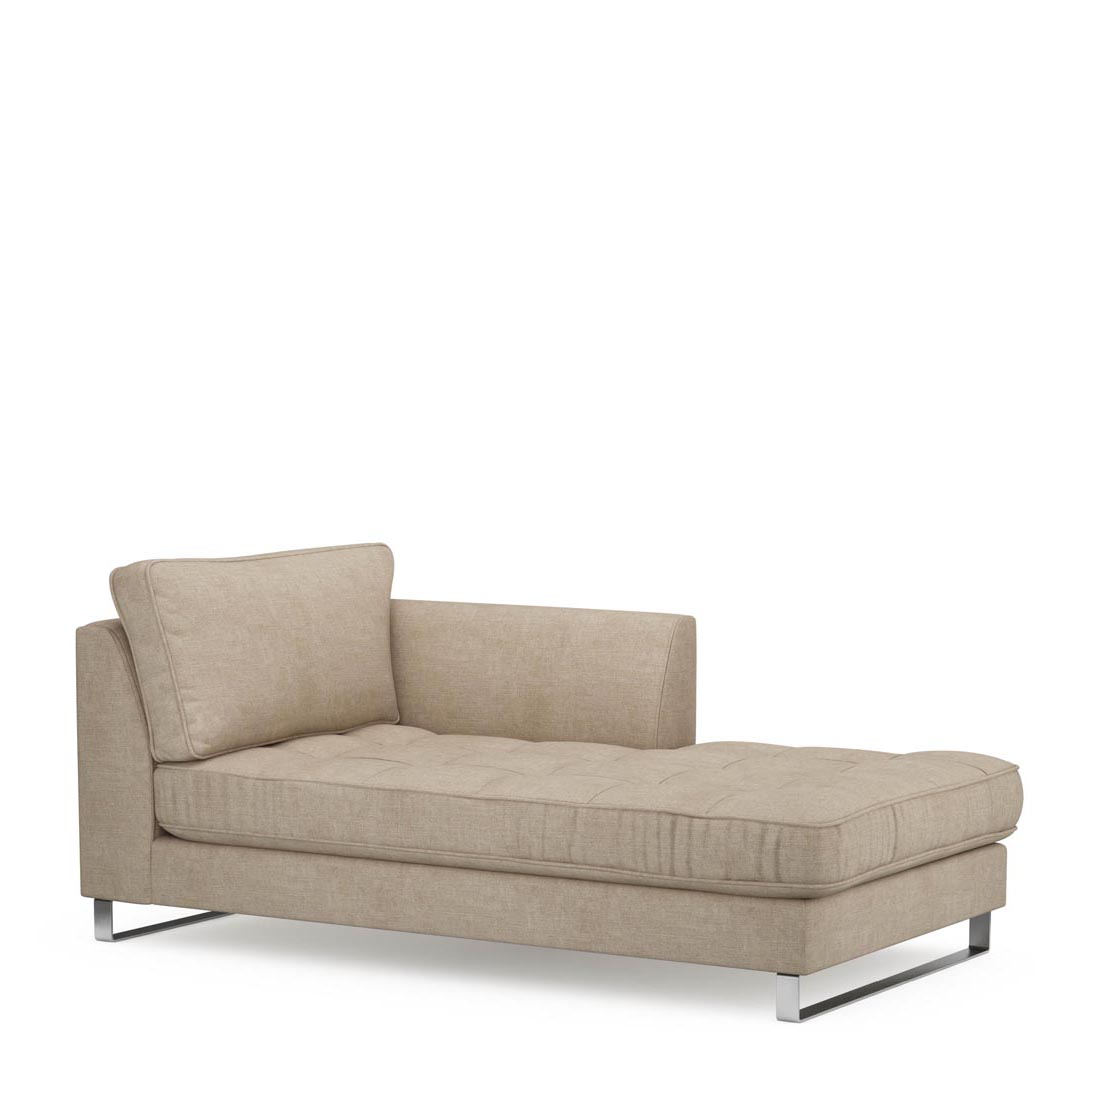 West Houston Chaiselongue Right, washed cotton, natural